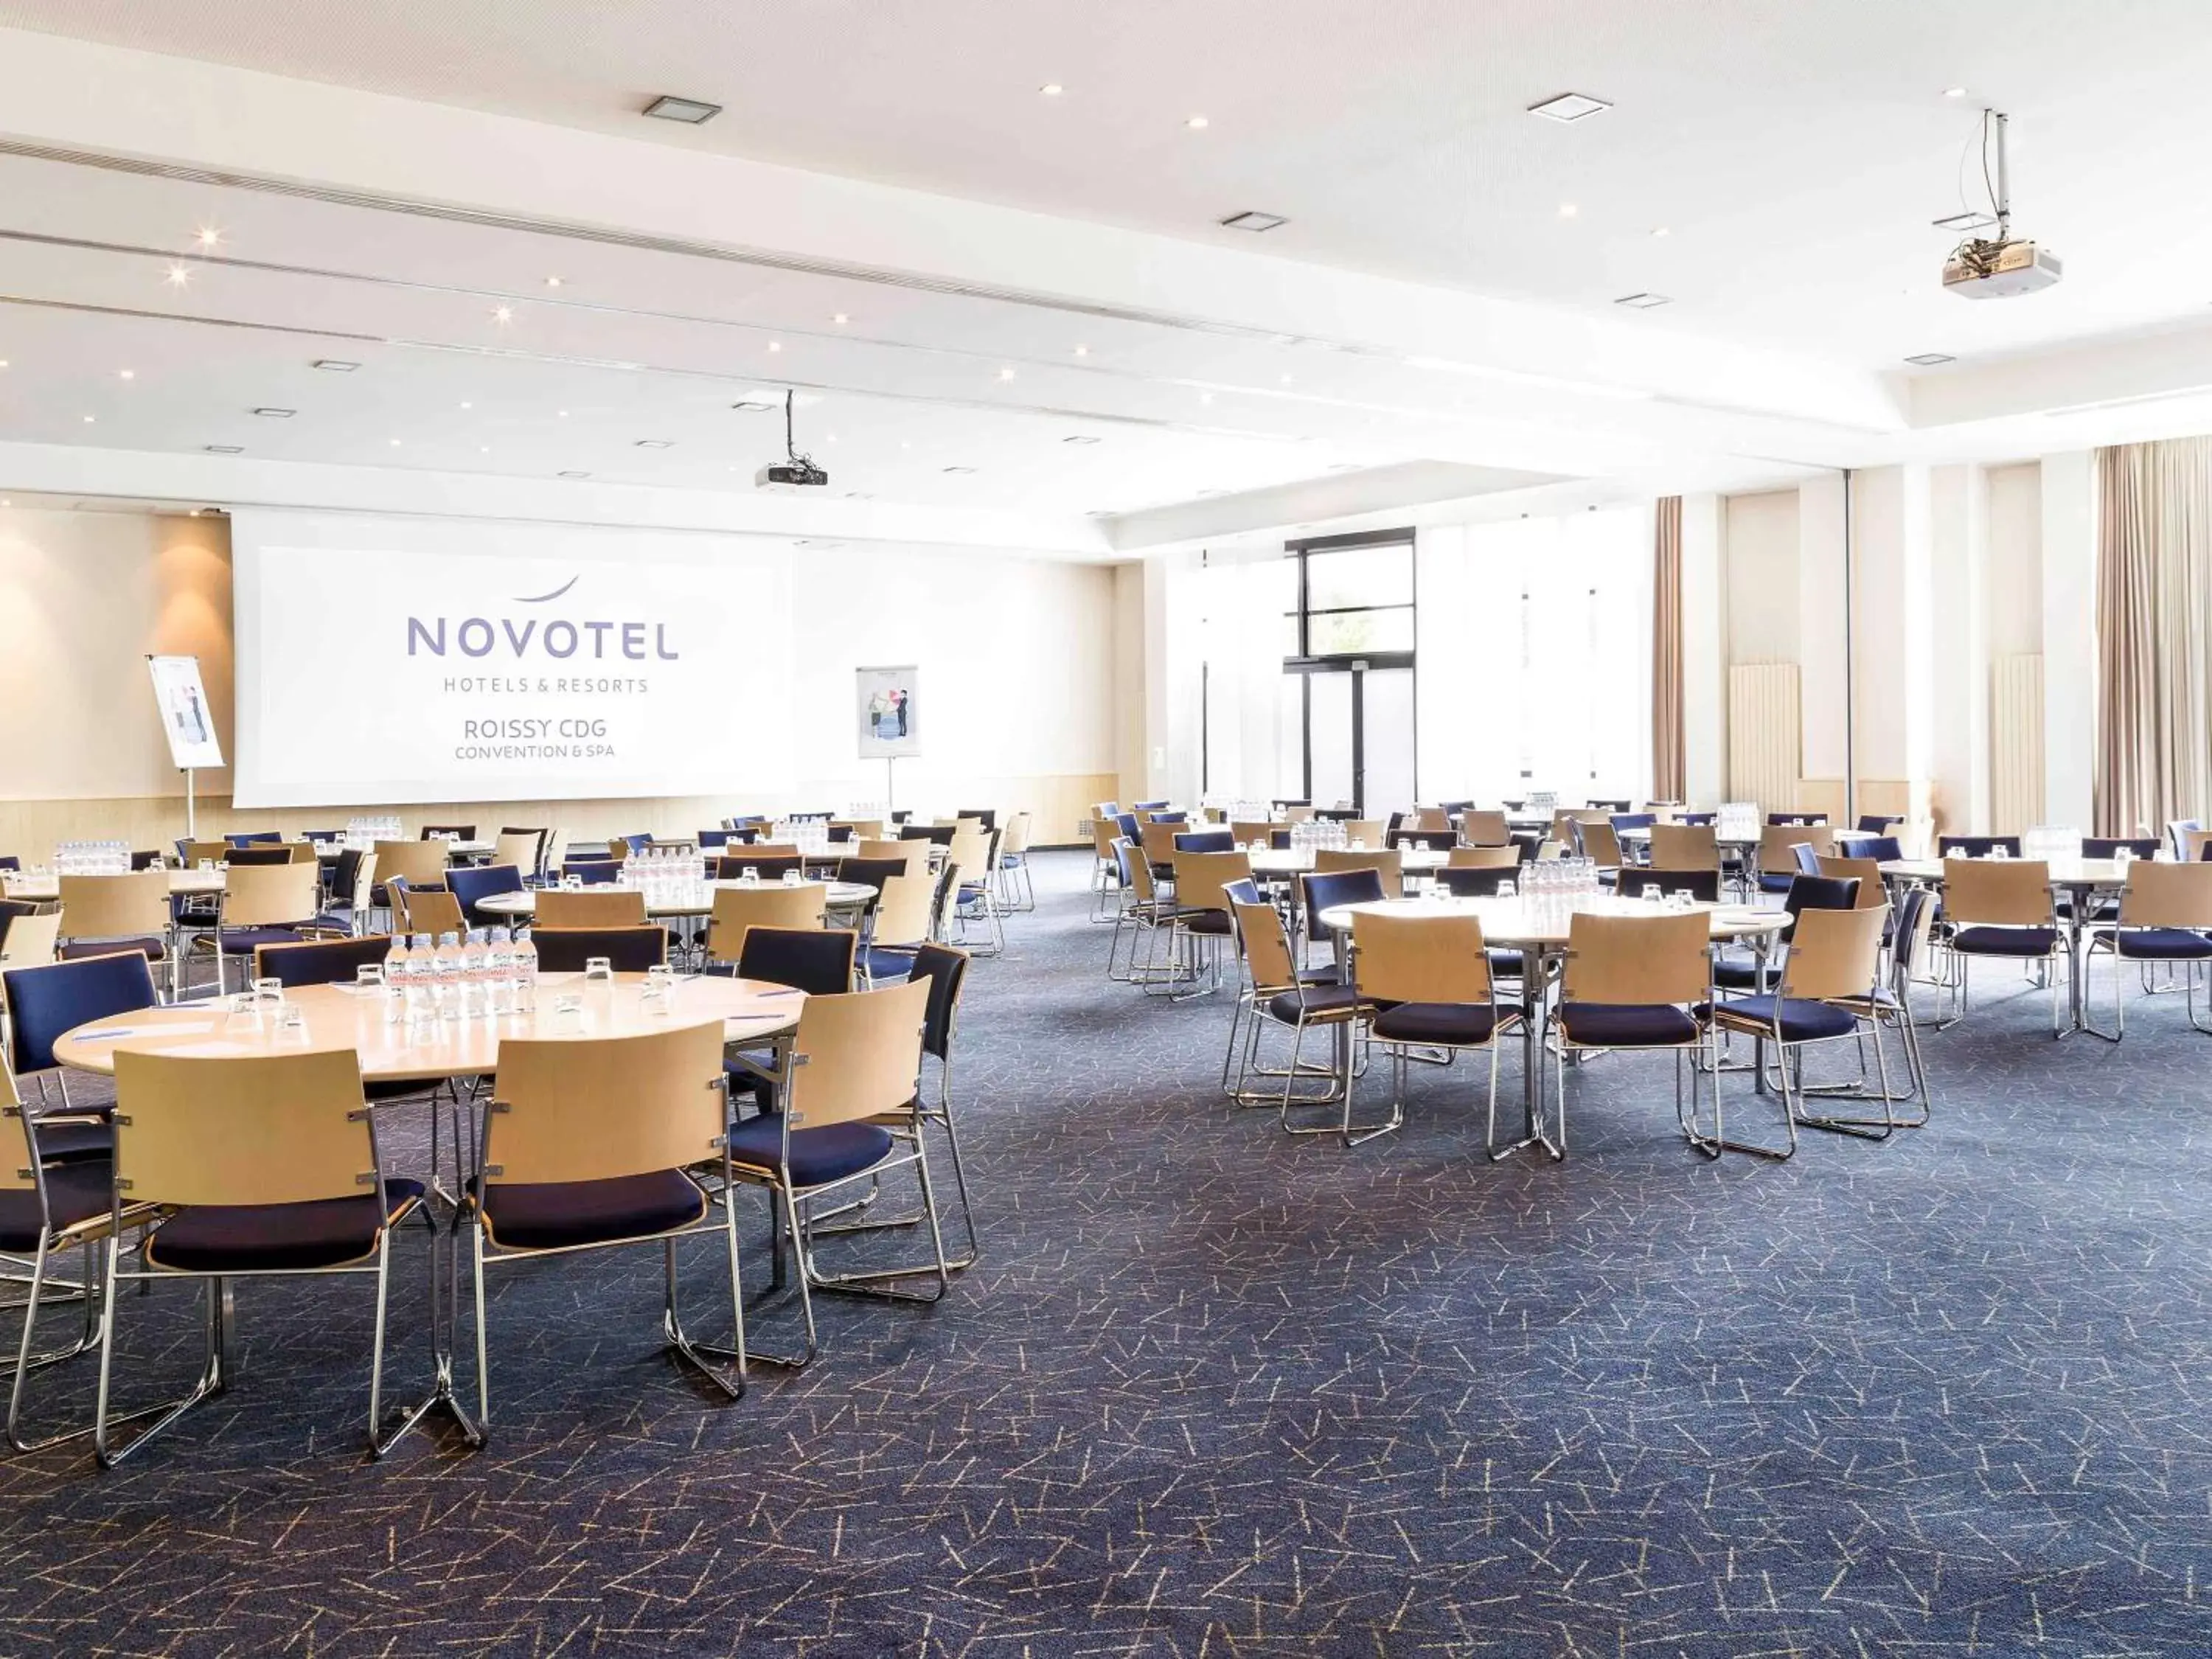 On site, Restaurant/Places to Eat in Novotel Paris Roissy CDG Convention